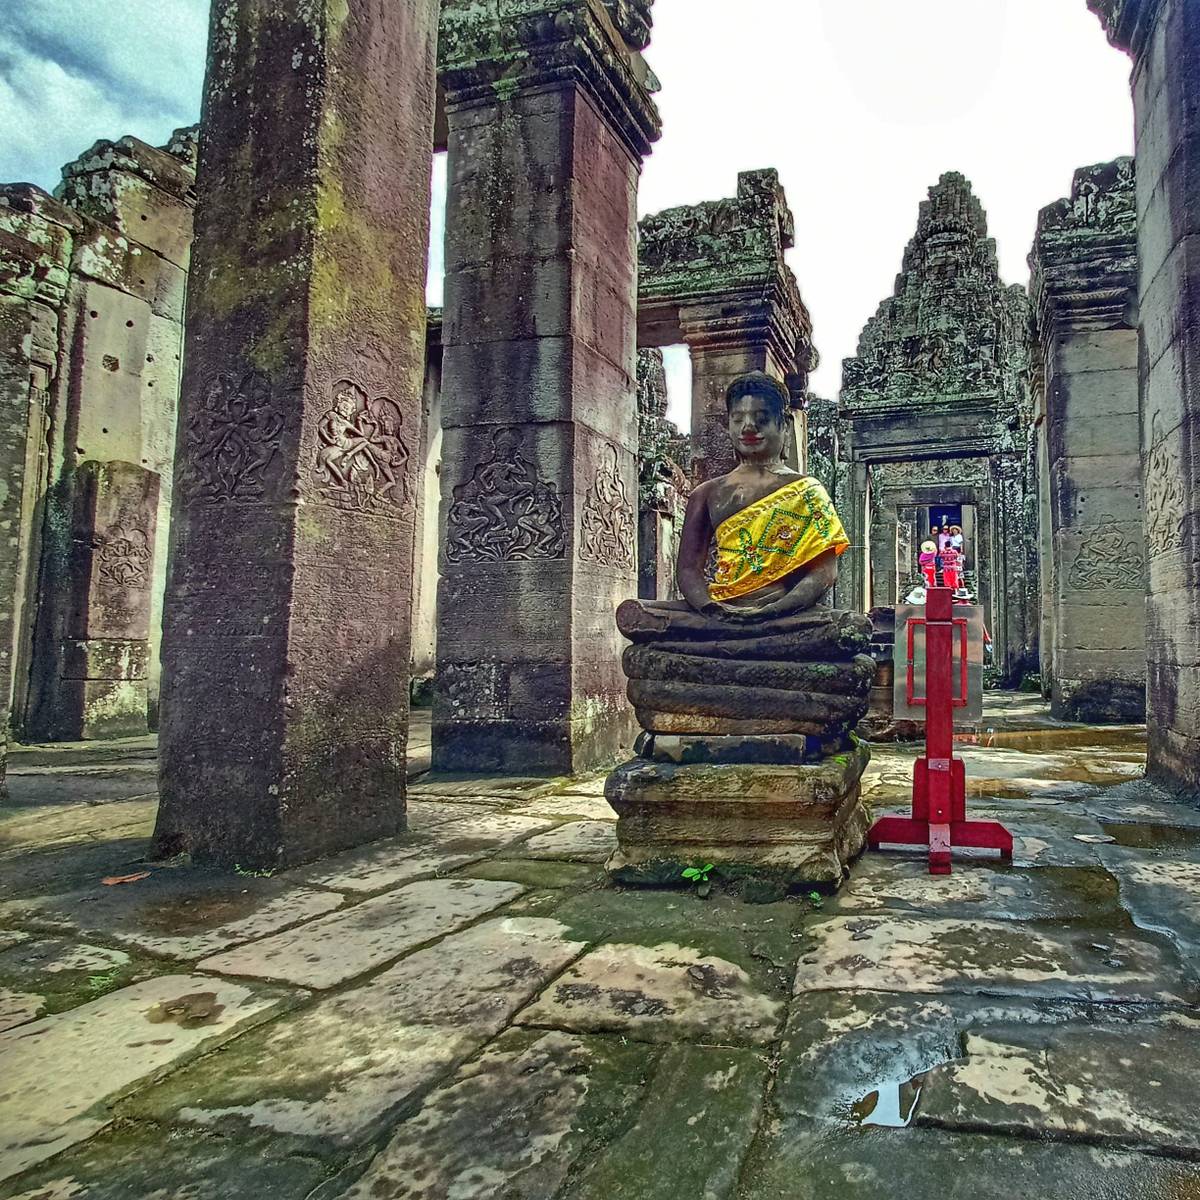 You’ll find plenty of Buddhas to pray to on your adventure.